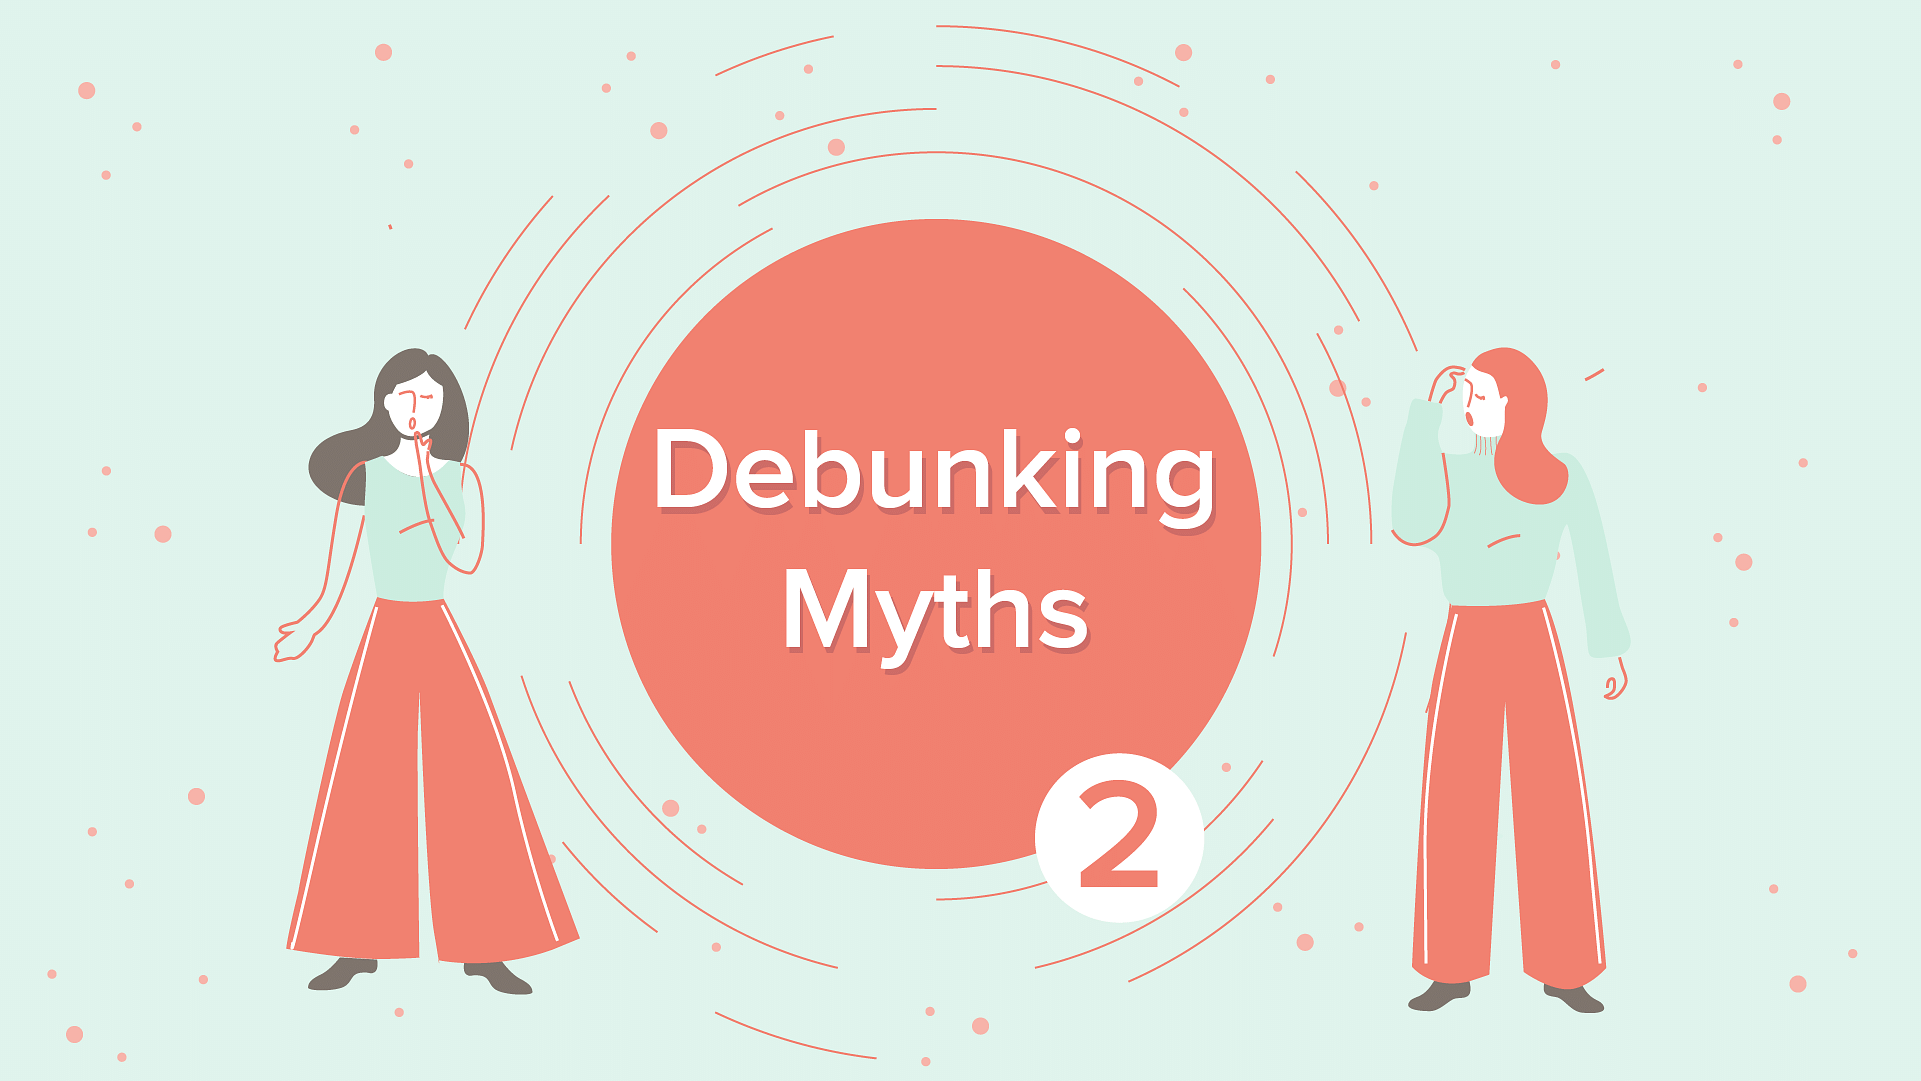 Myth: “A menstruating woman should not be in contact with any food”